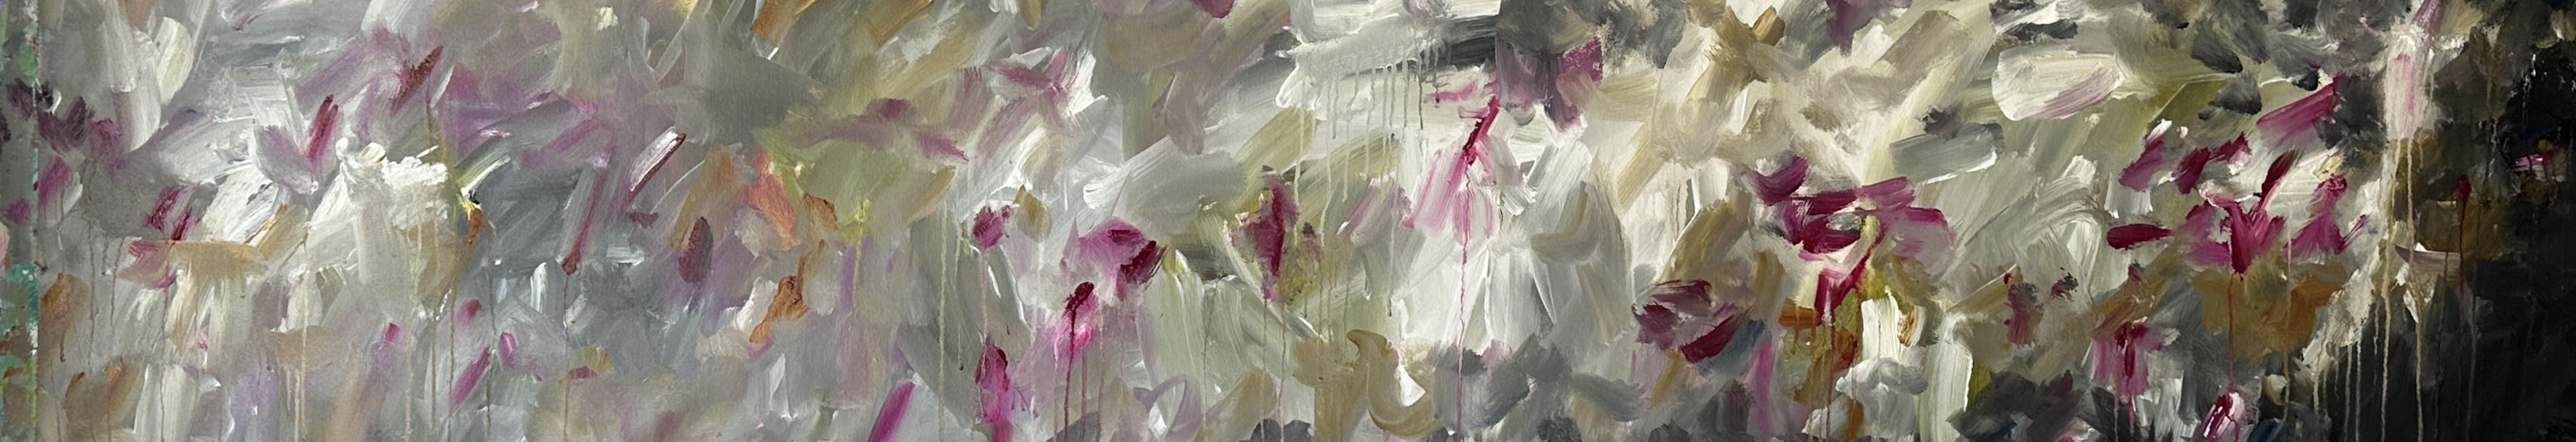   "AS IF PETALS DANCE"    The newest original artwork draws inspiration from the untamed beauty of wildflower gardens. The gentle, subdued hues juxtaposed with the vibrant burst of magenta evoke a reminiscent feeling reminiscent of Monet's artistic